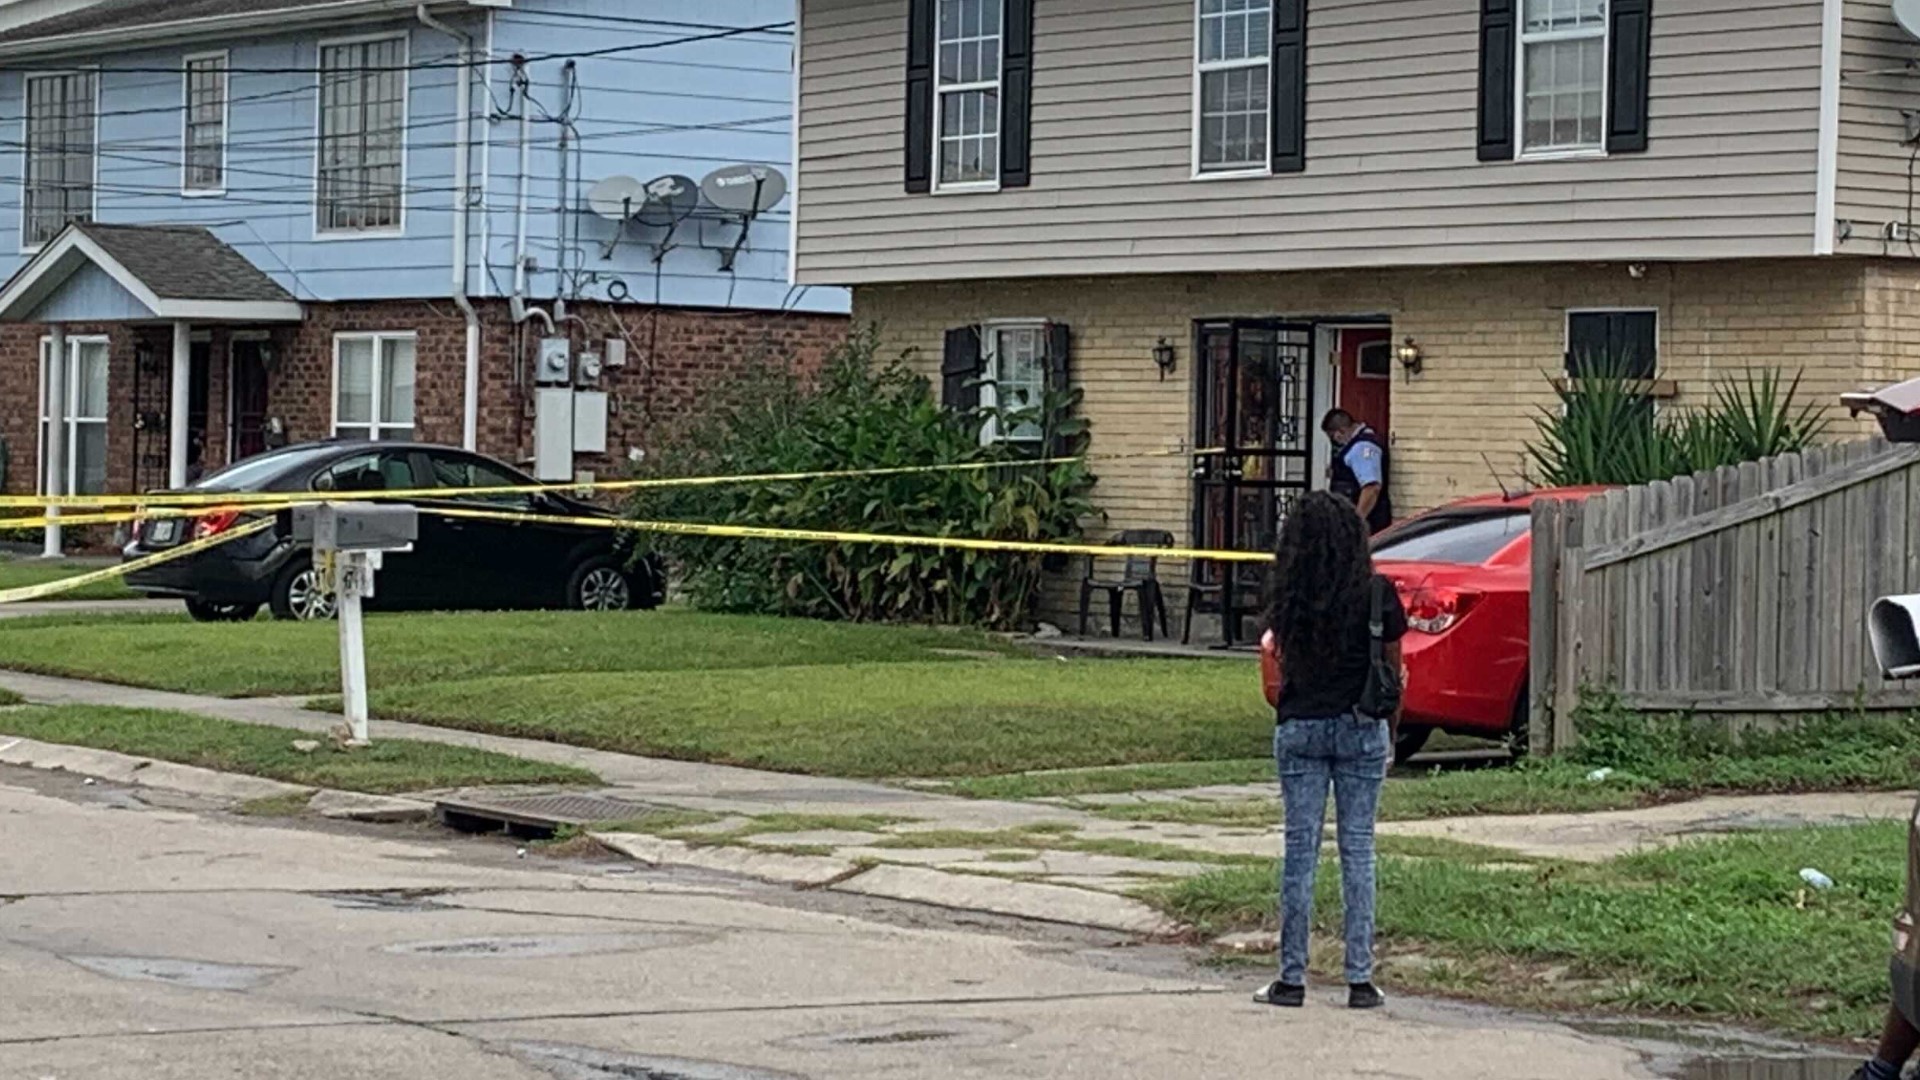 Nopd Woman Shot And Killed In New Orleans East On Friday